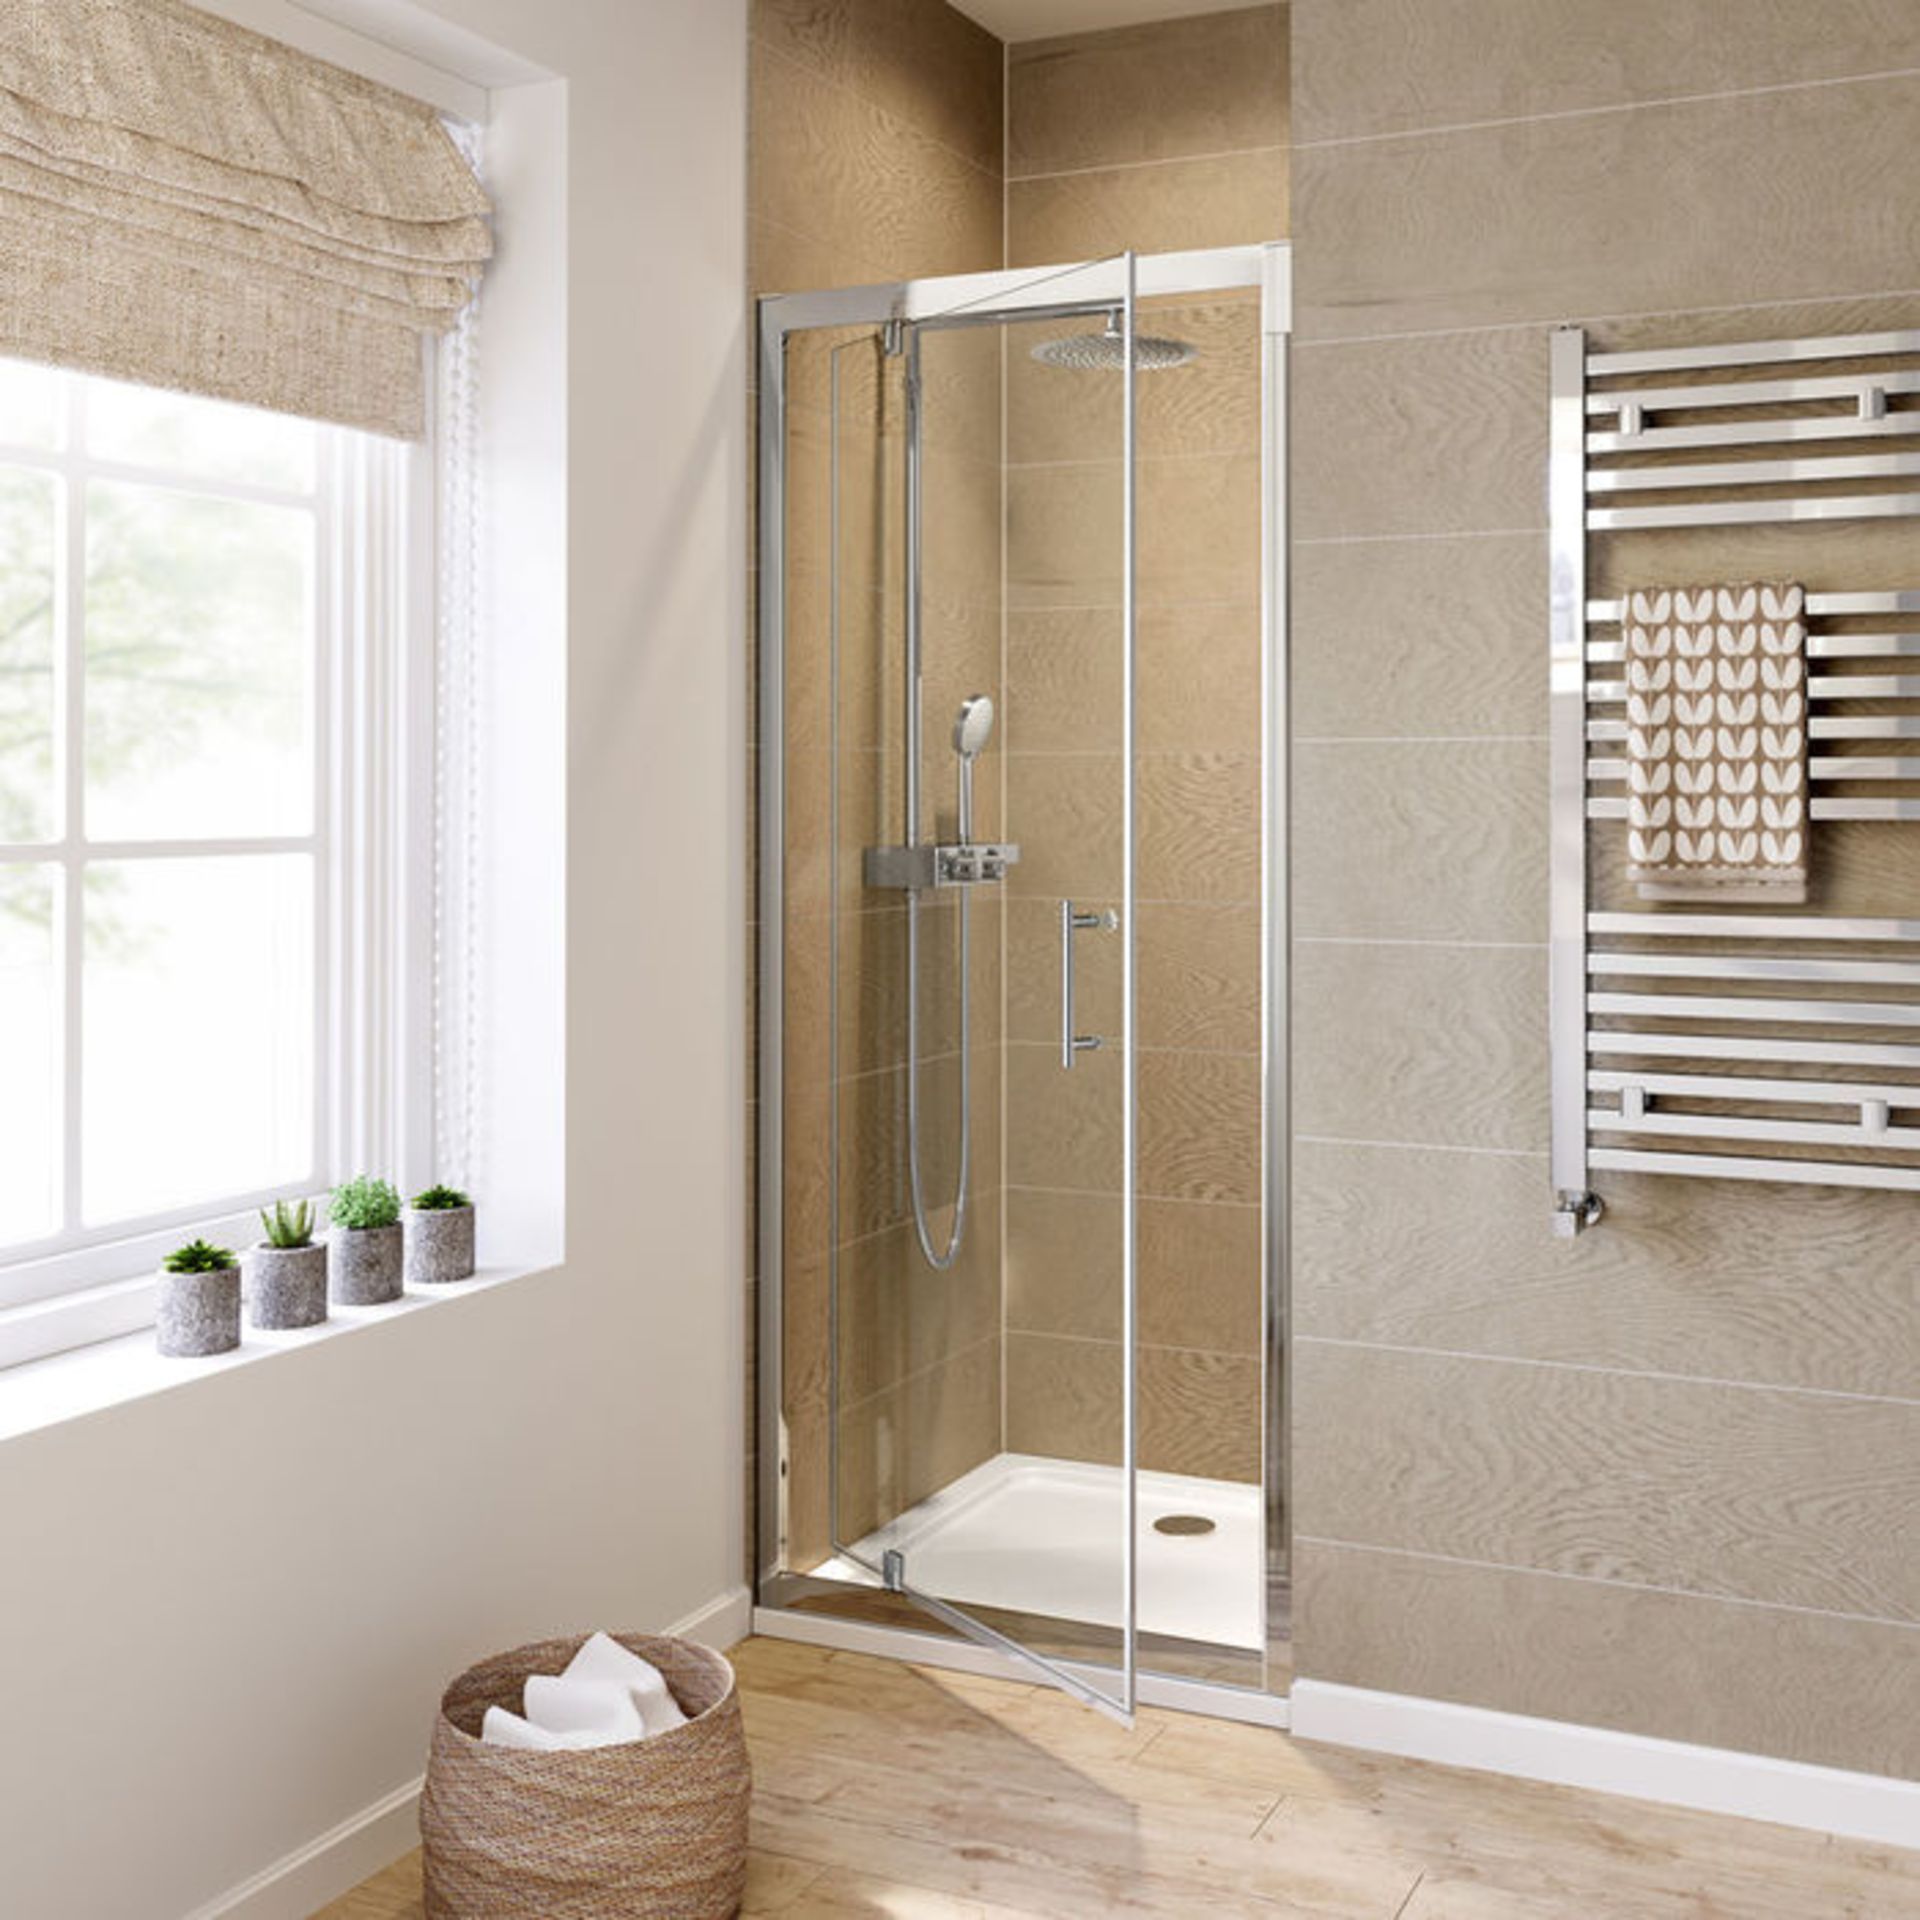 New 700mm - 6mm - Premium Pivot Shower Door. RRP £299.99.8mm Safety Glass Fully Waterproof Tested - Image 2 of 2